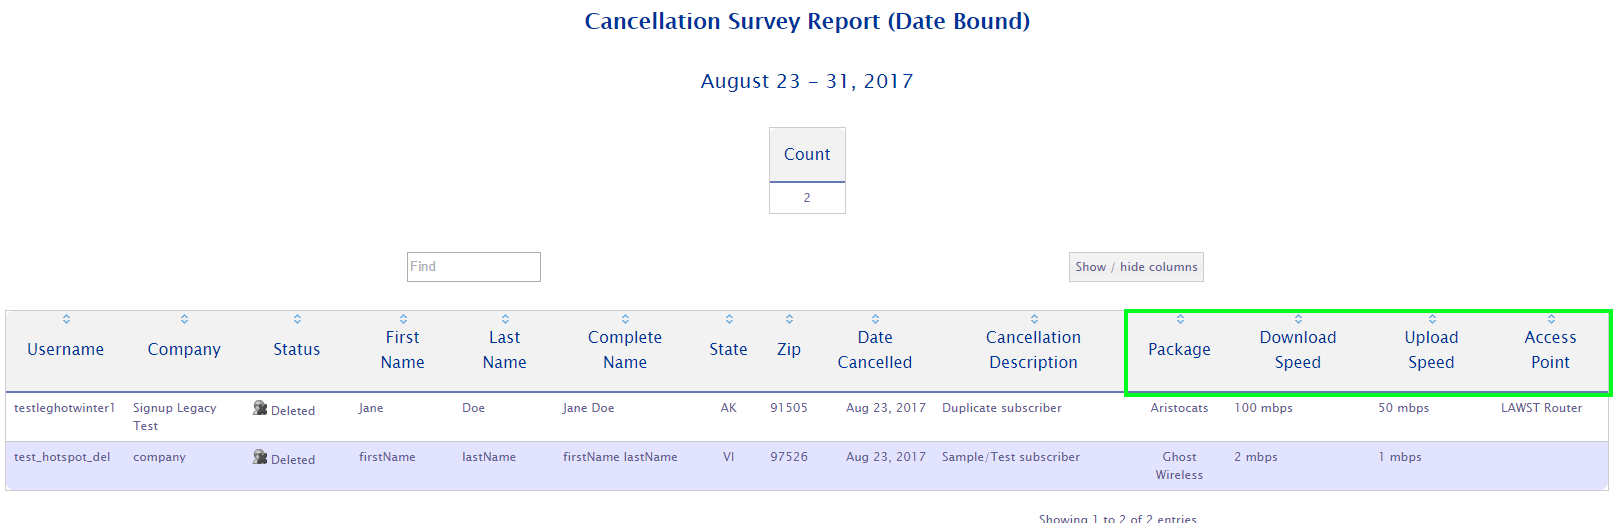 New Deleted Subscriber Data Columns added to Monthly Cancellation Report